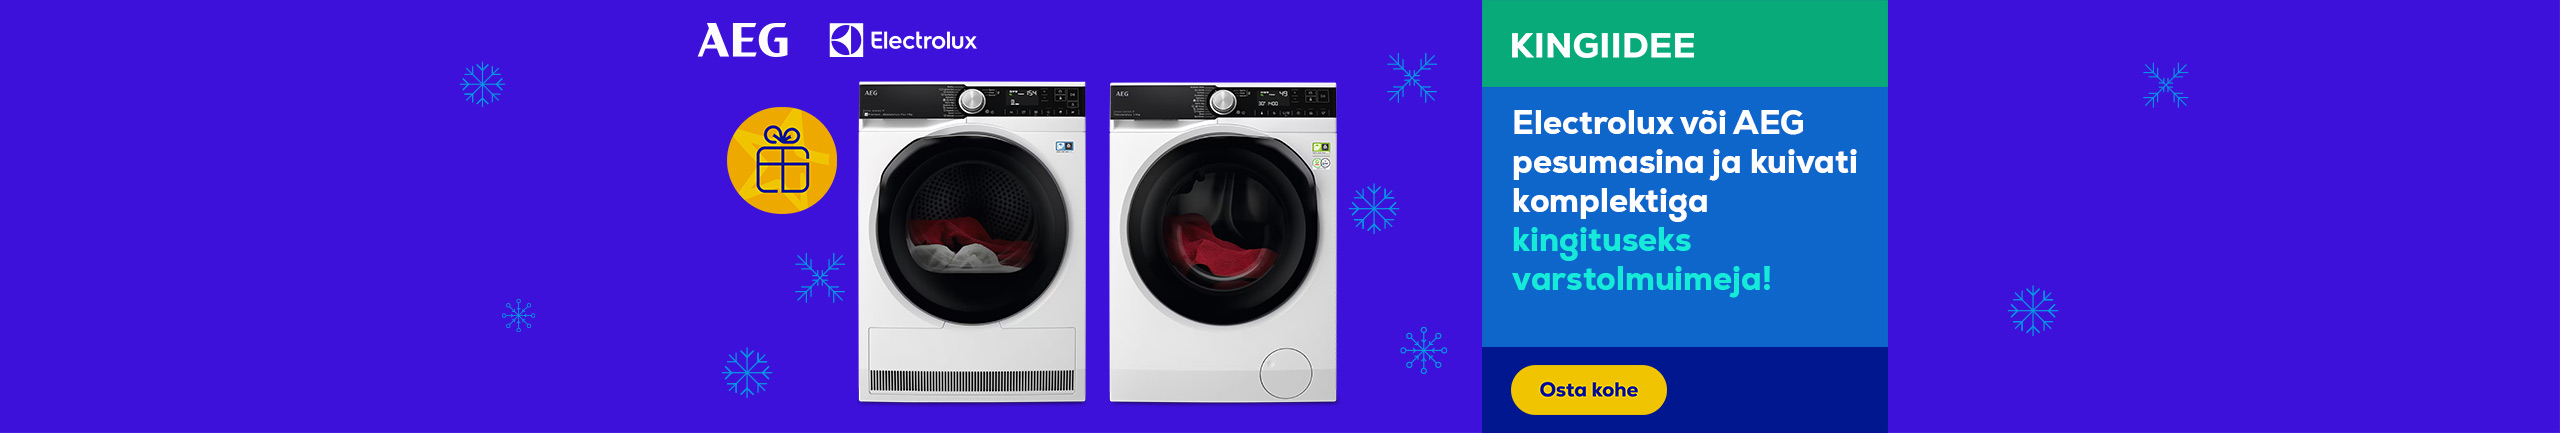 Get a handheld vacuum cleaner as a gift with the purchase of an Electrolux or AEG washing machine and dryer set!